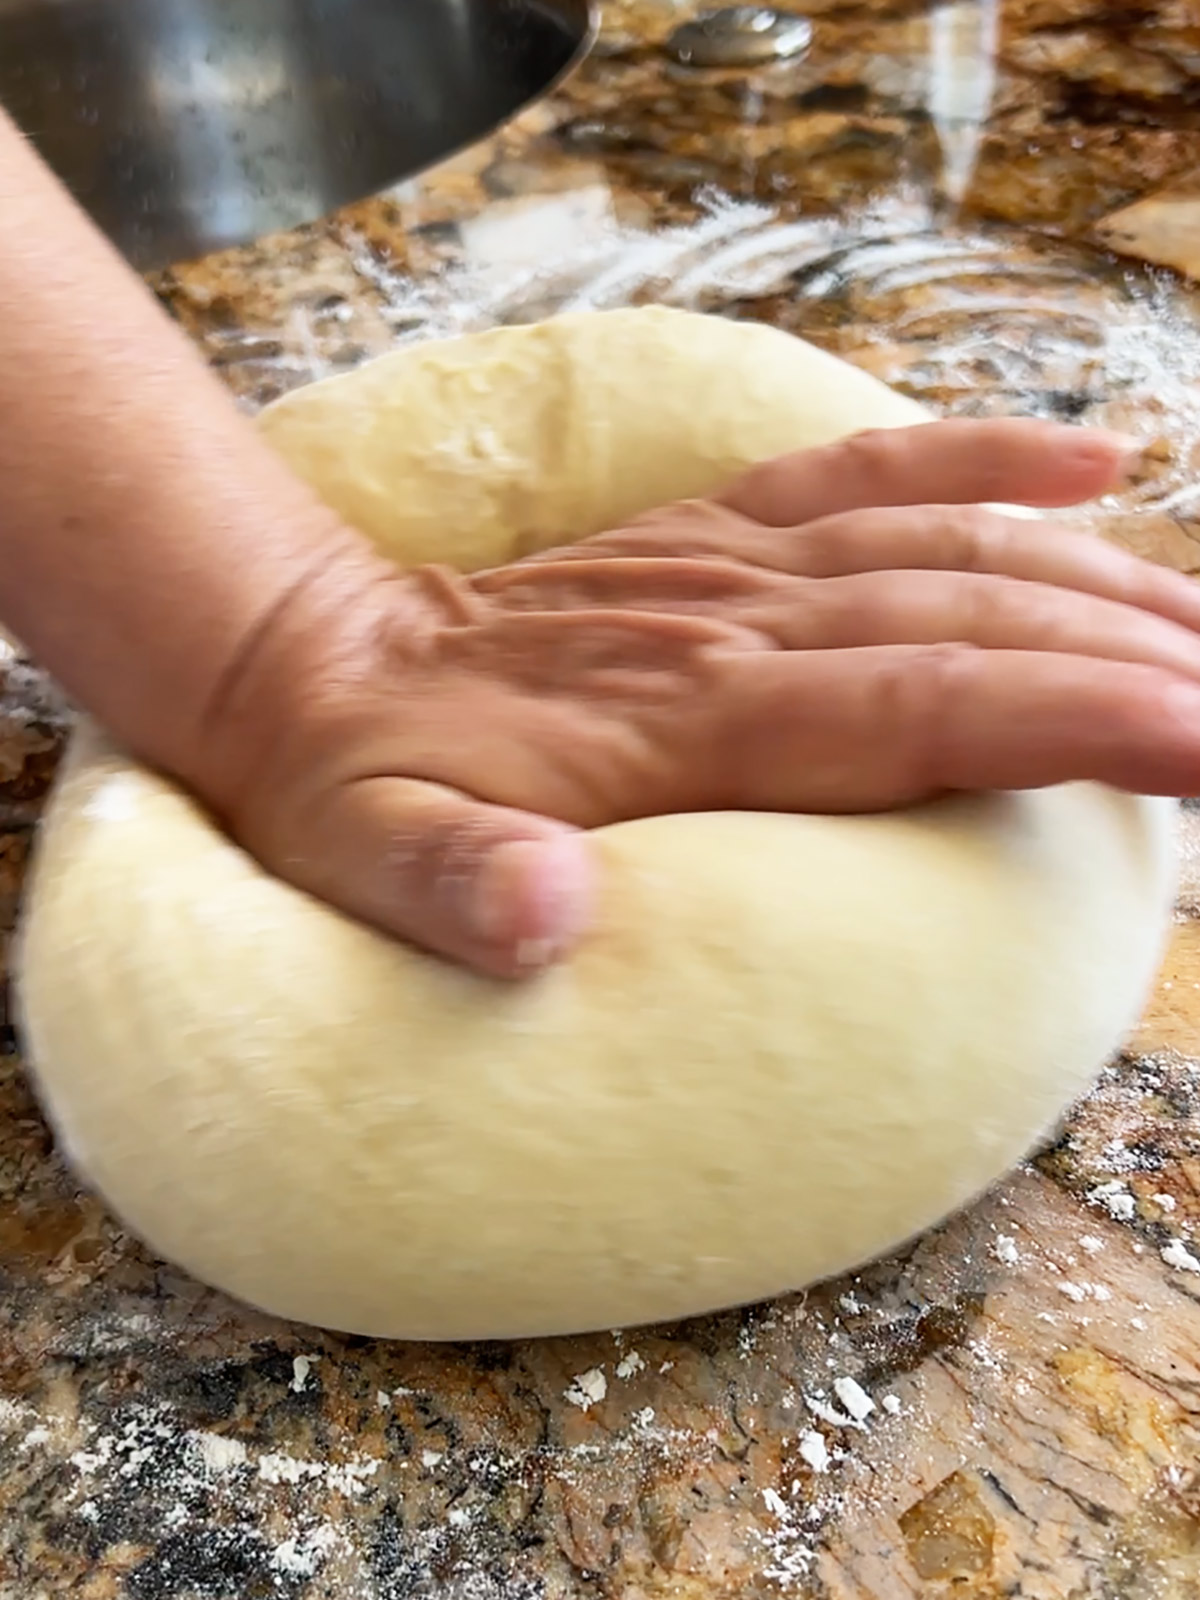 A hand kneading challah dough on a granite counter with flour on it.